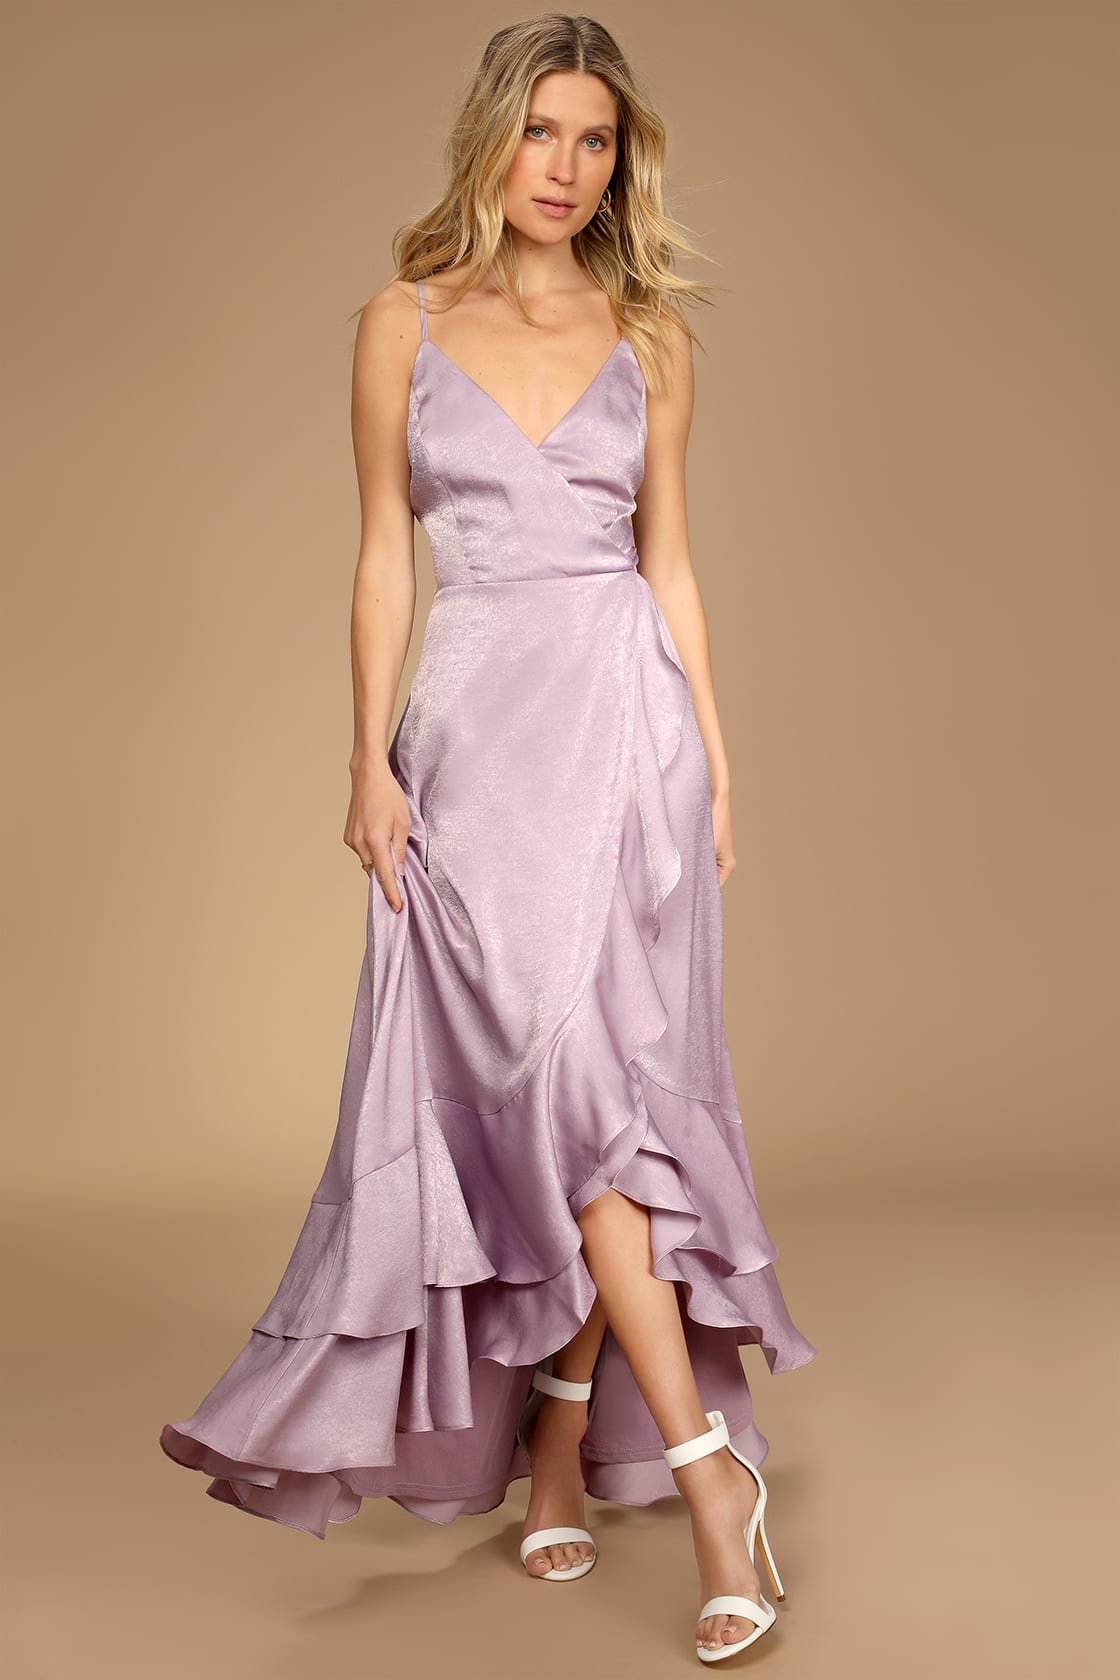 In Love Forever Lavender Satin Lace-Up High-Low Maxi Dress